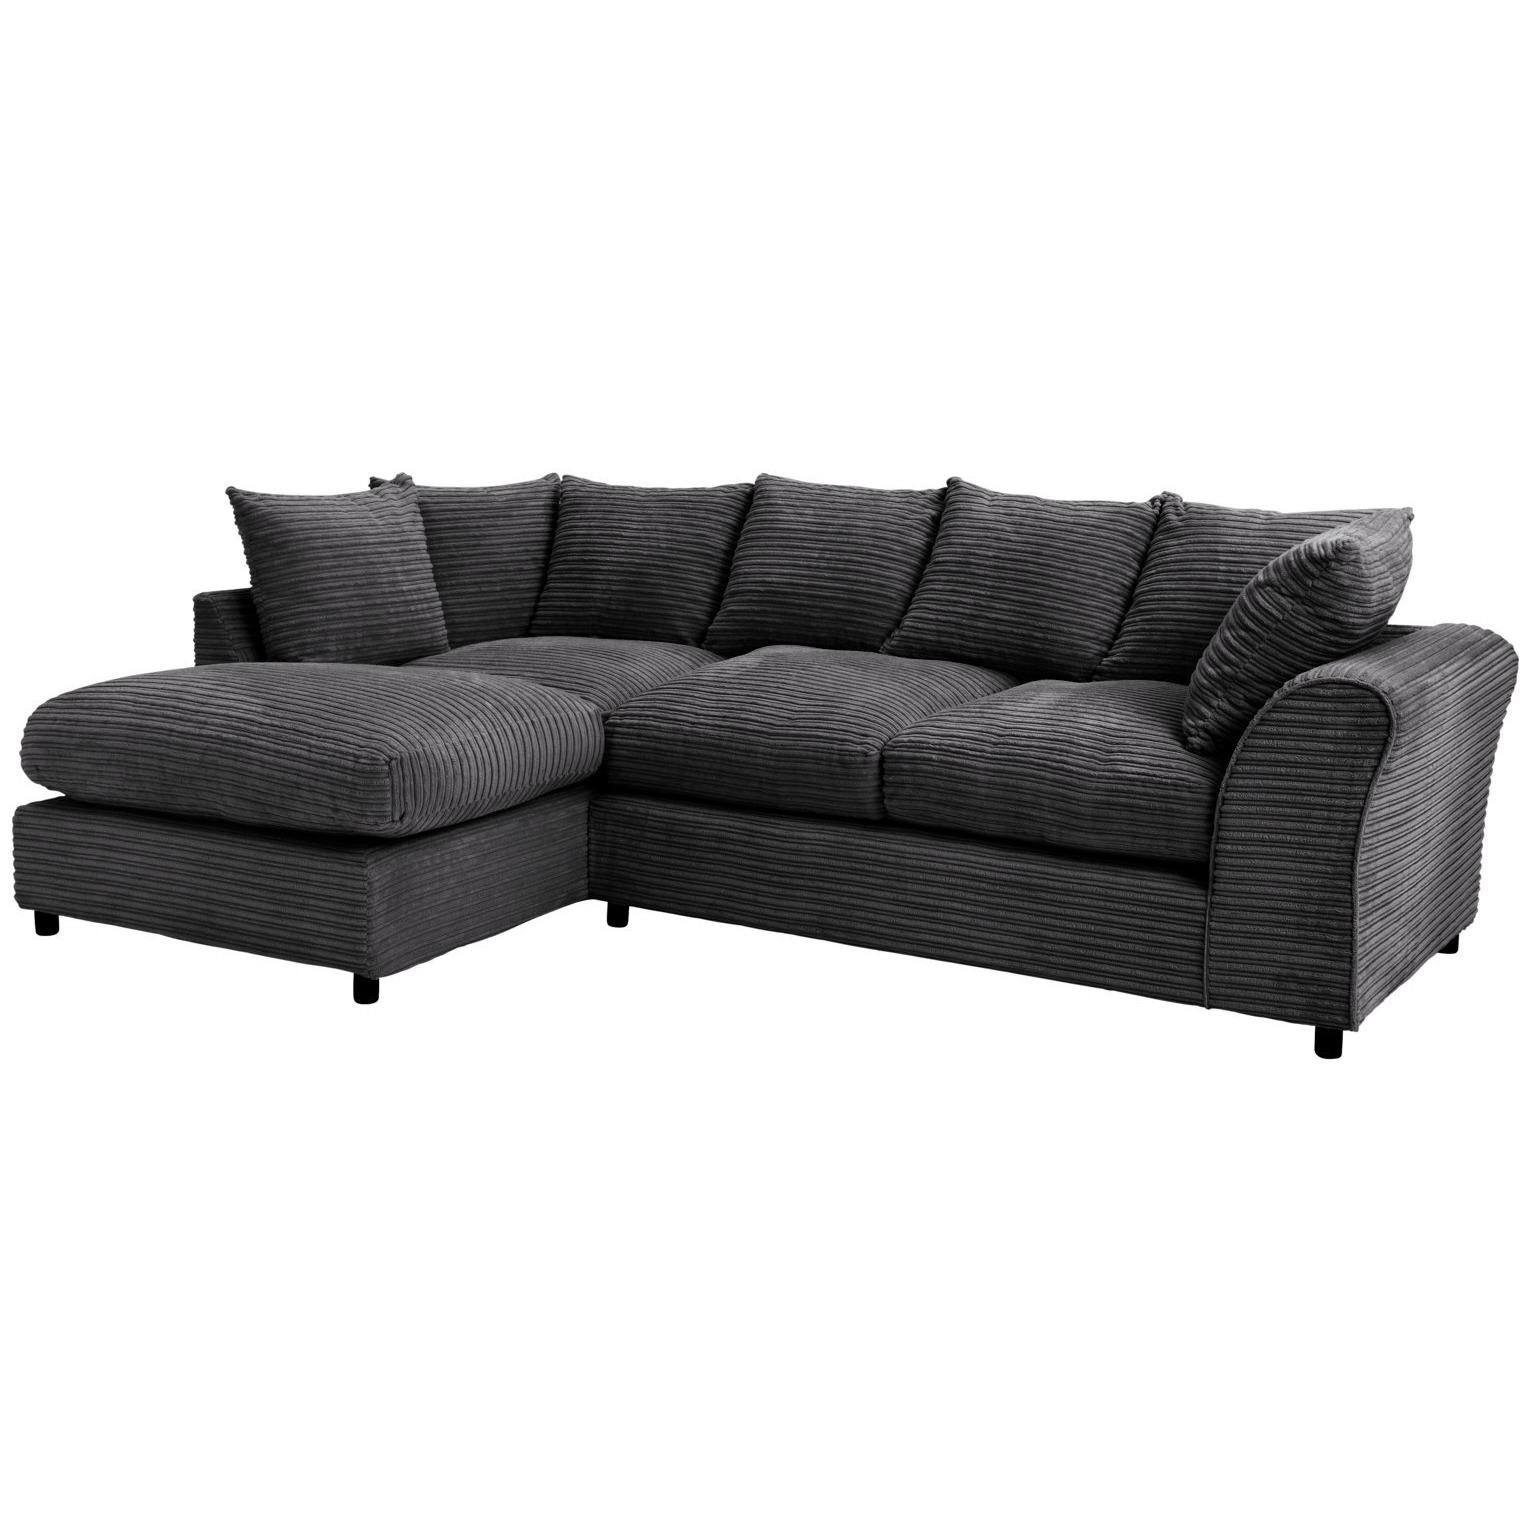 Argos Home Harry Large Left Hand Corner Chaise Sofa-Charcoal - image 1